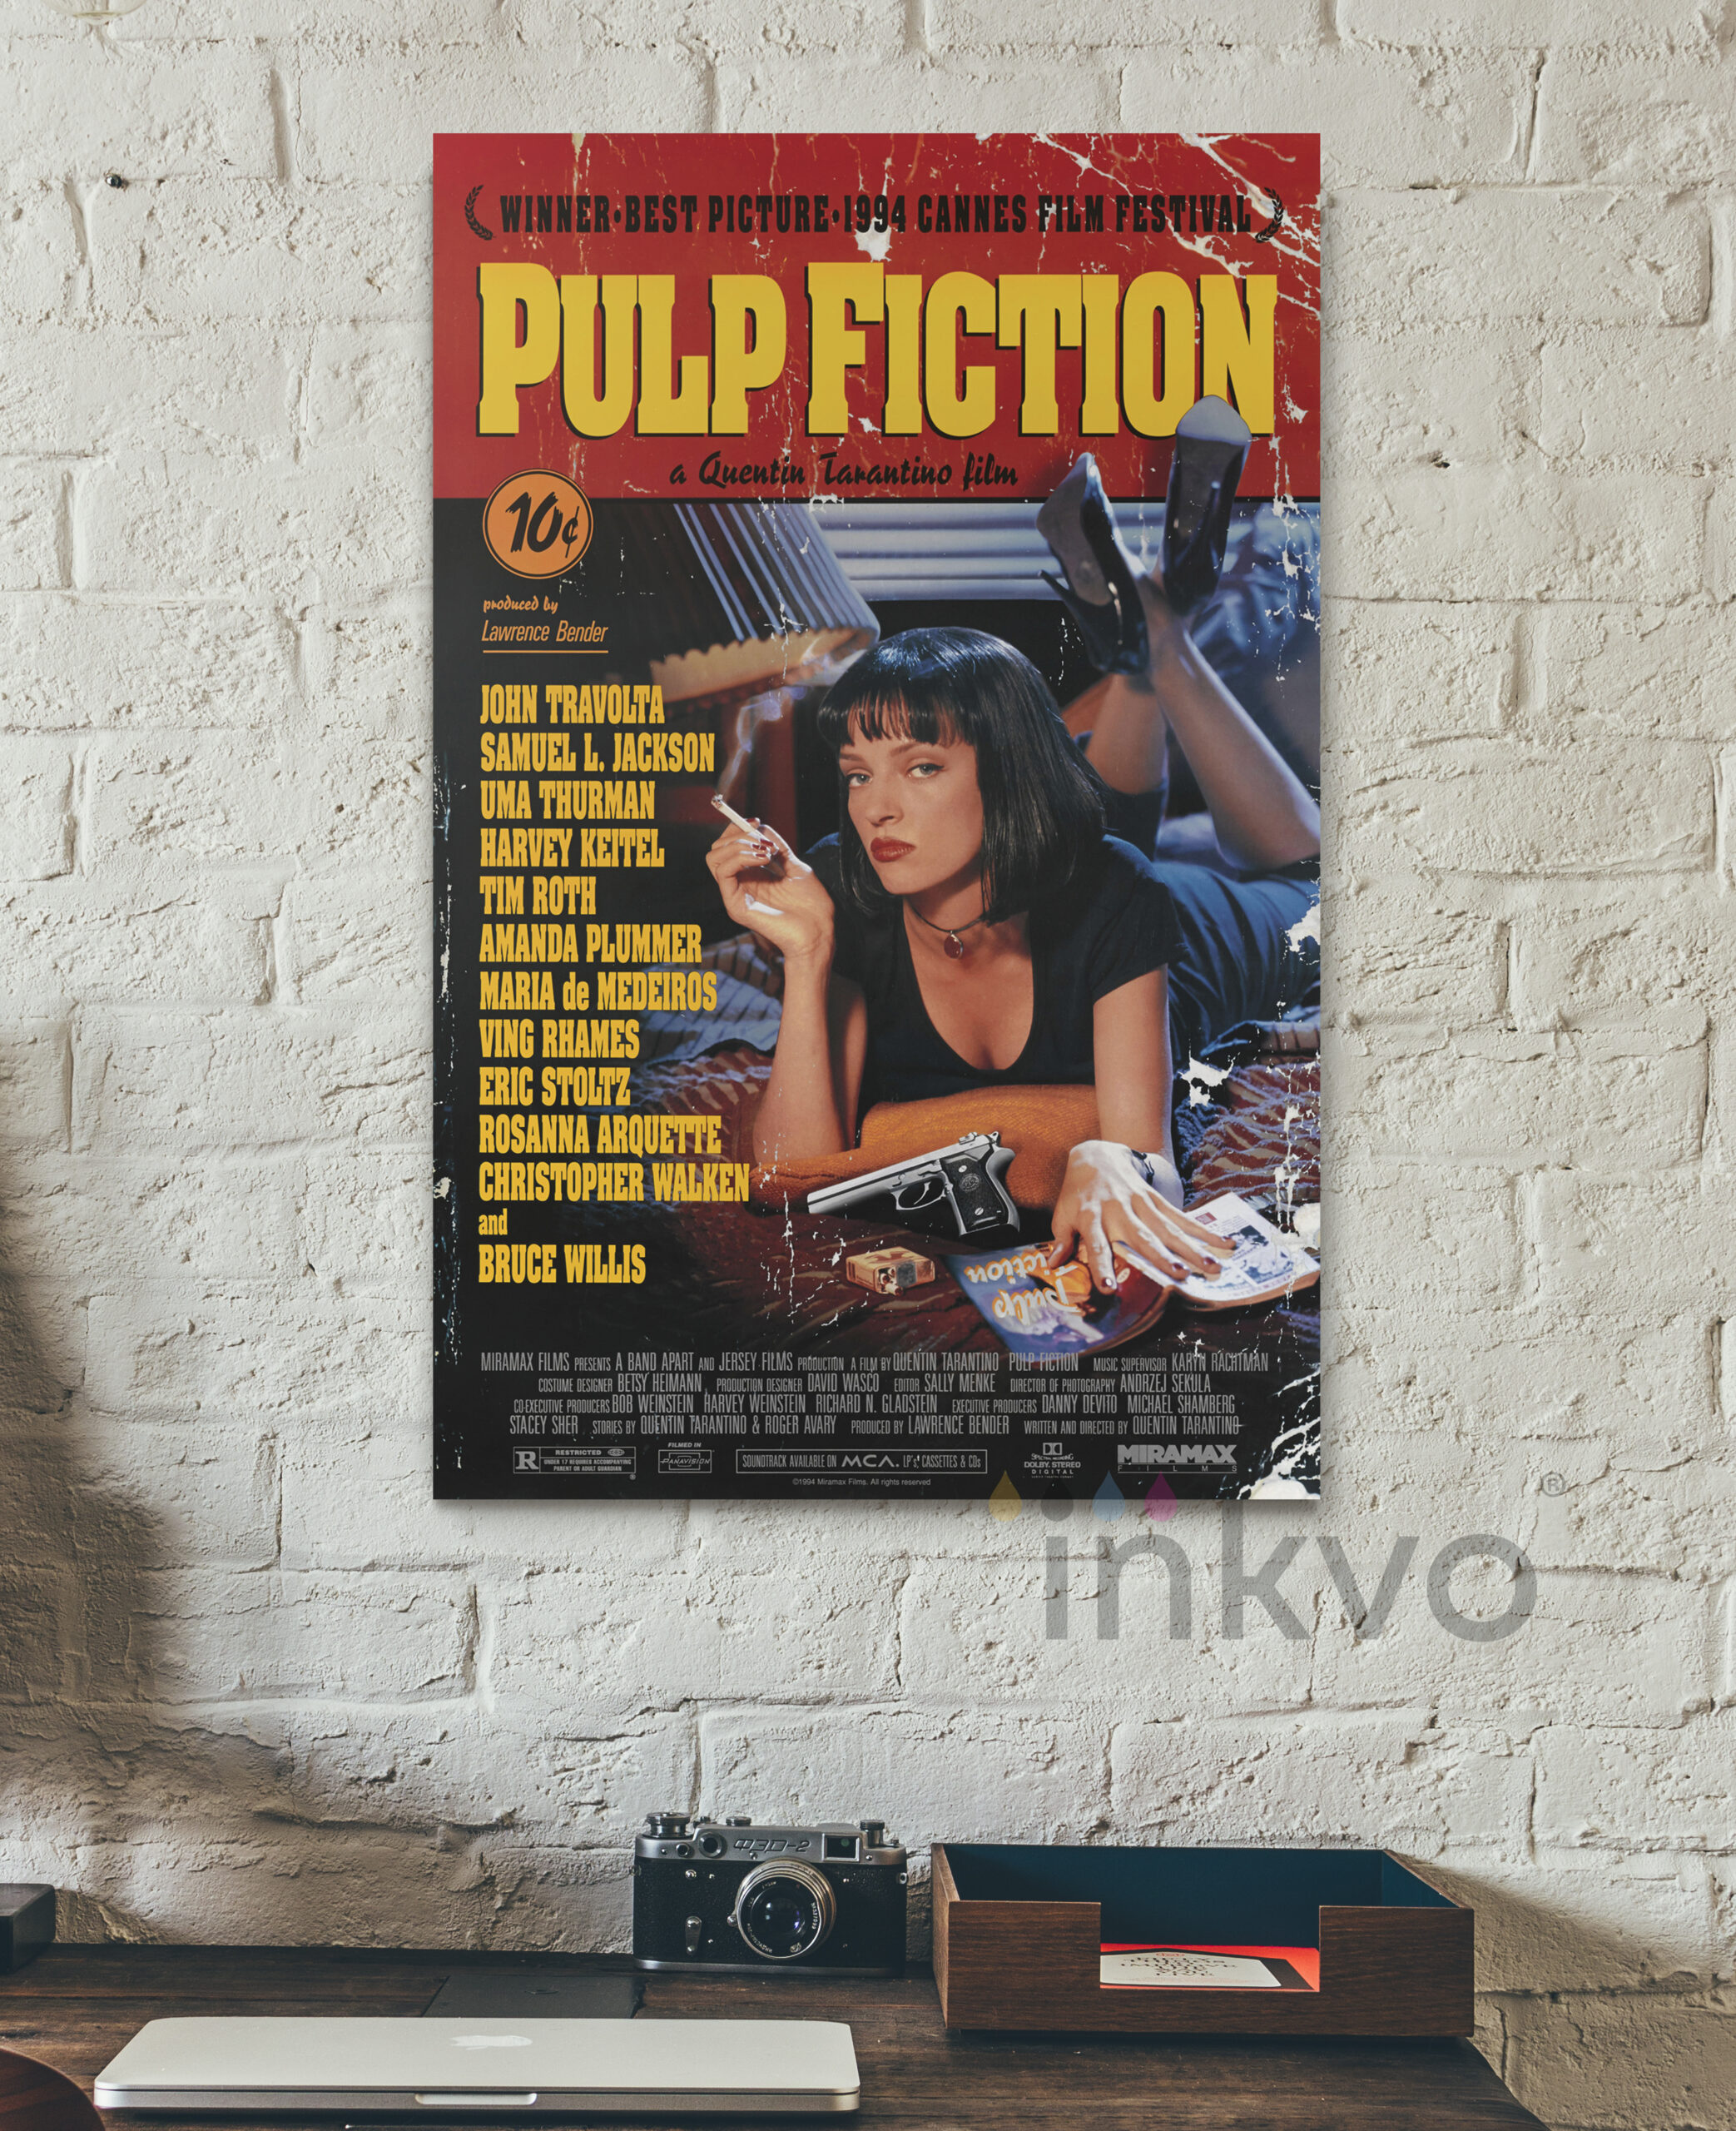 Pulp Fiction Poster Cinema Roll off Canister Tvs 60x40 Movie to Be